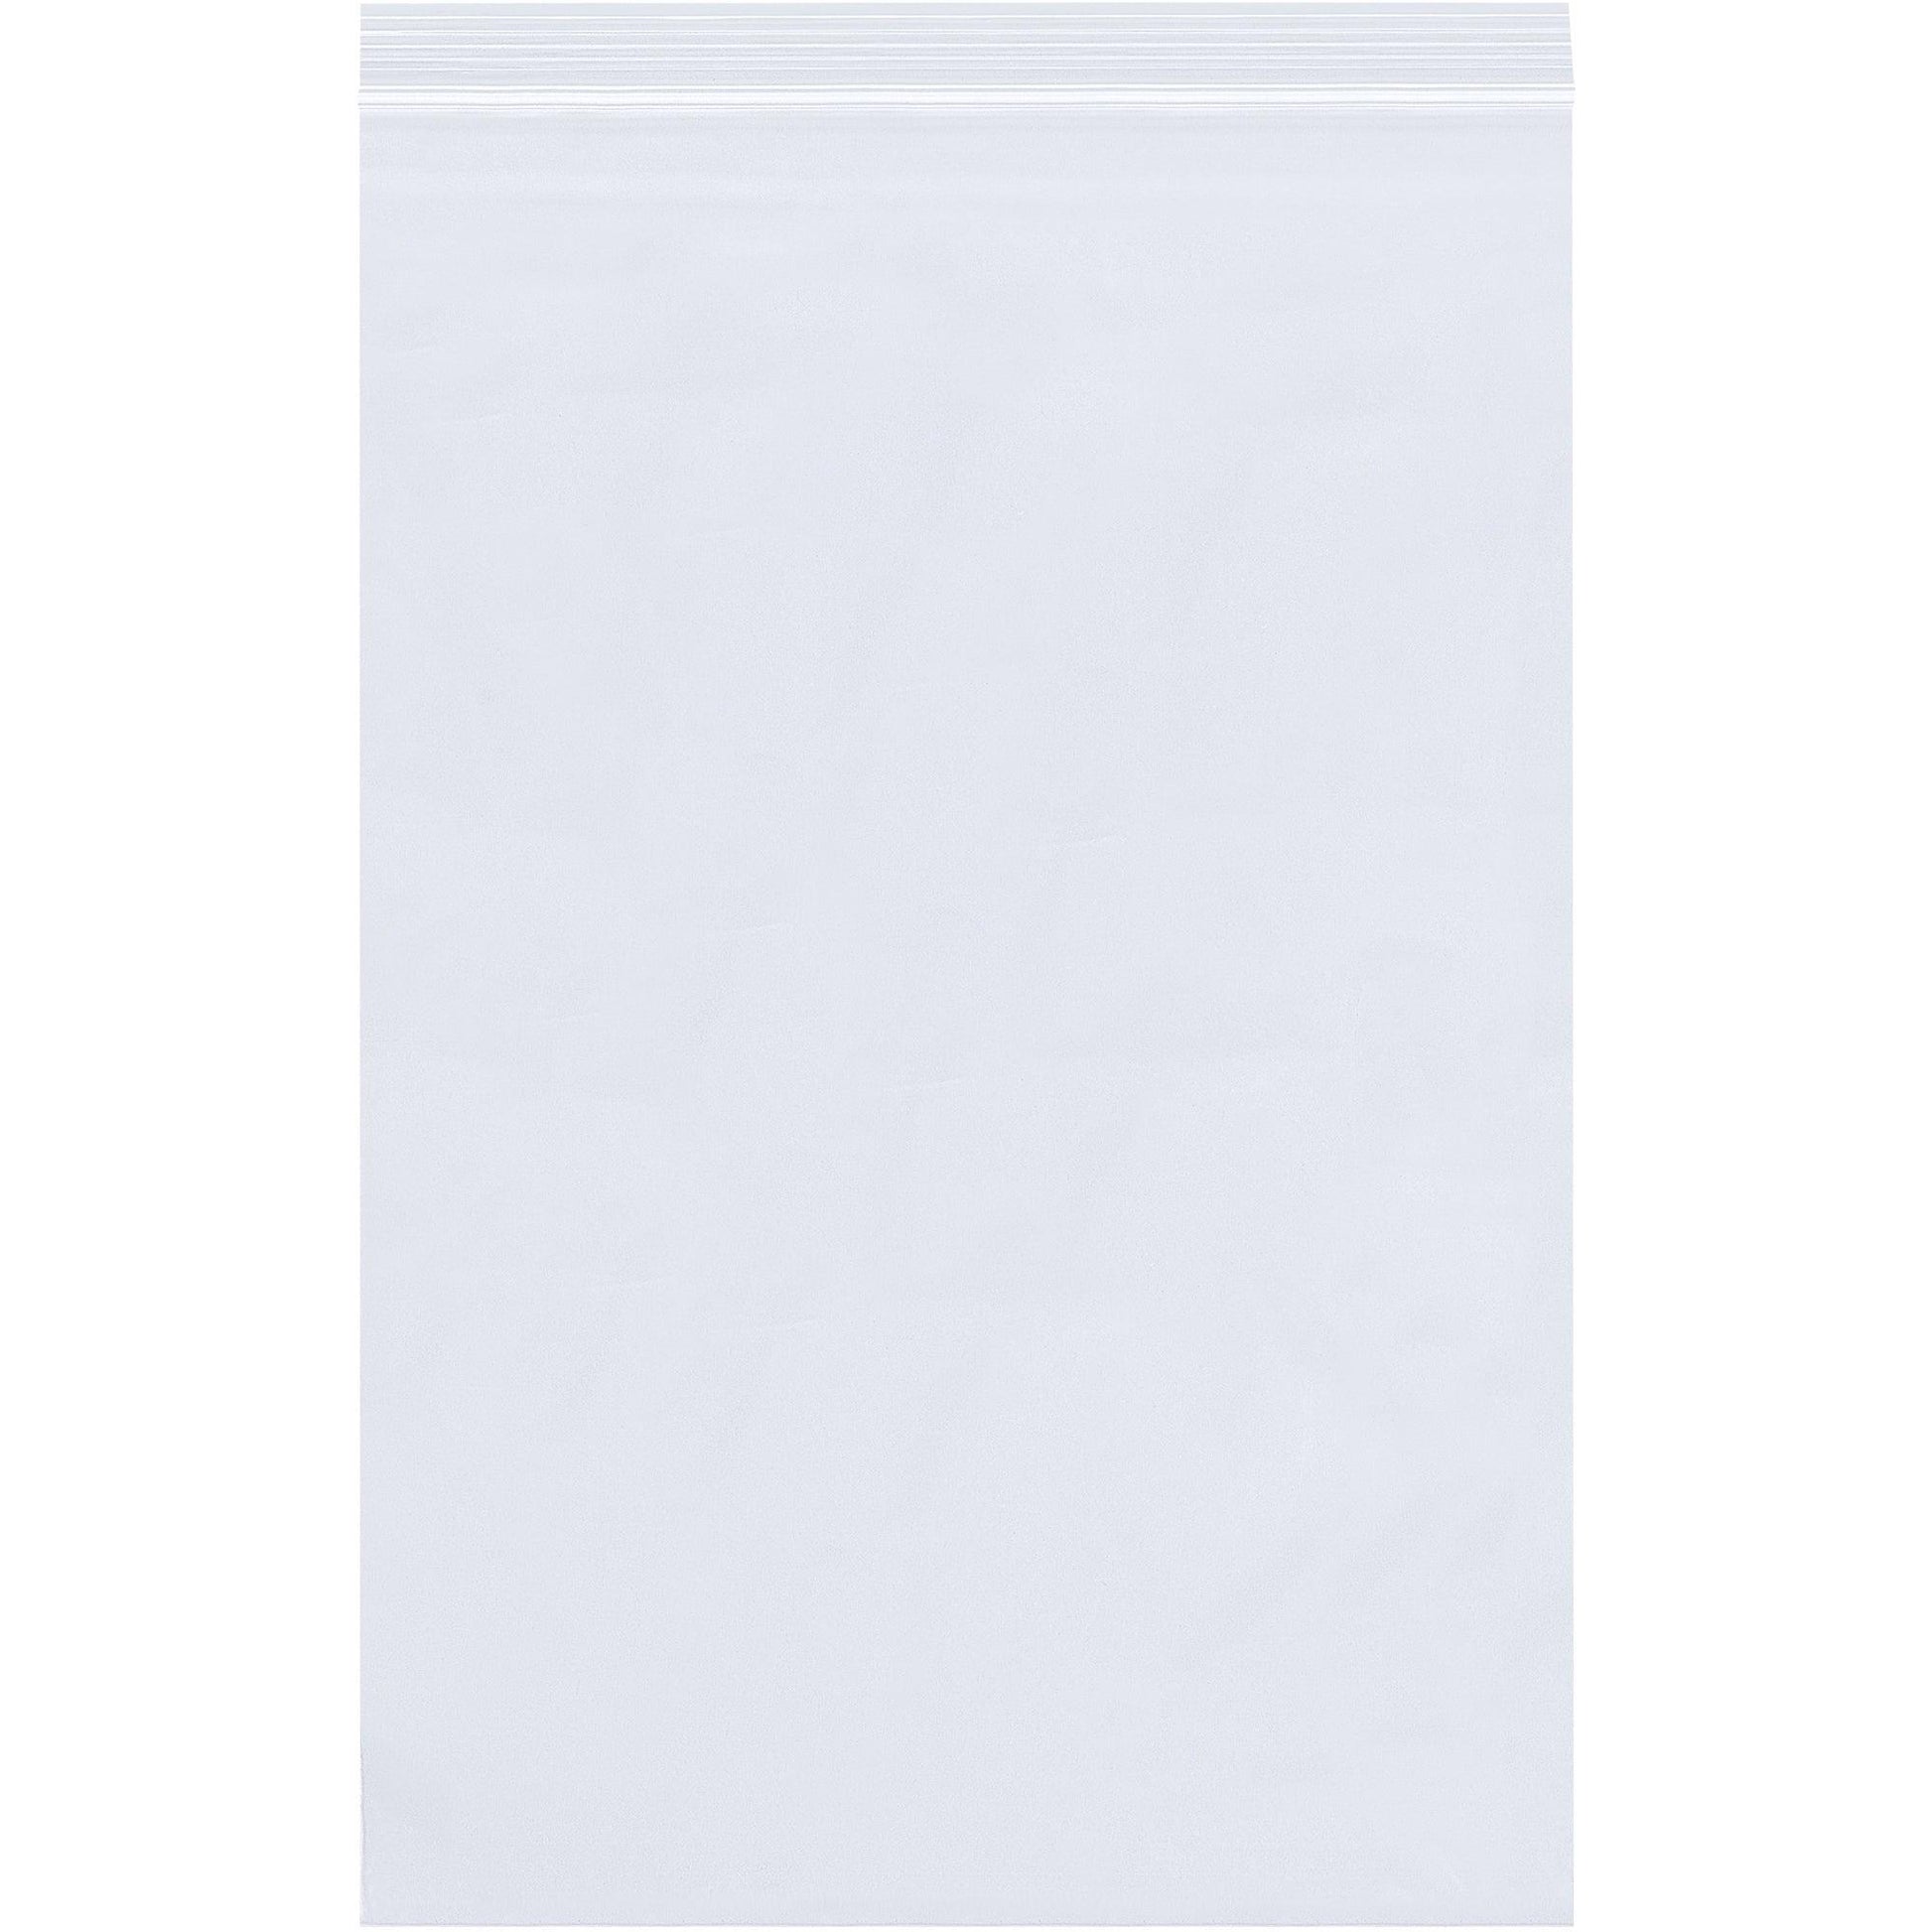 7 x 10" - 2 Mil Reclosable Poly Bags - PB3632